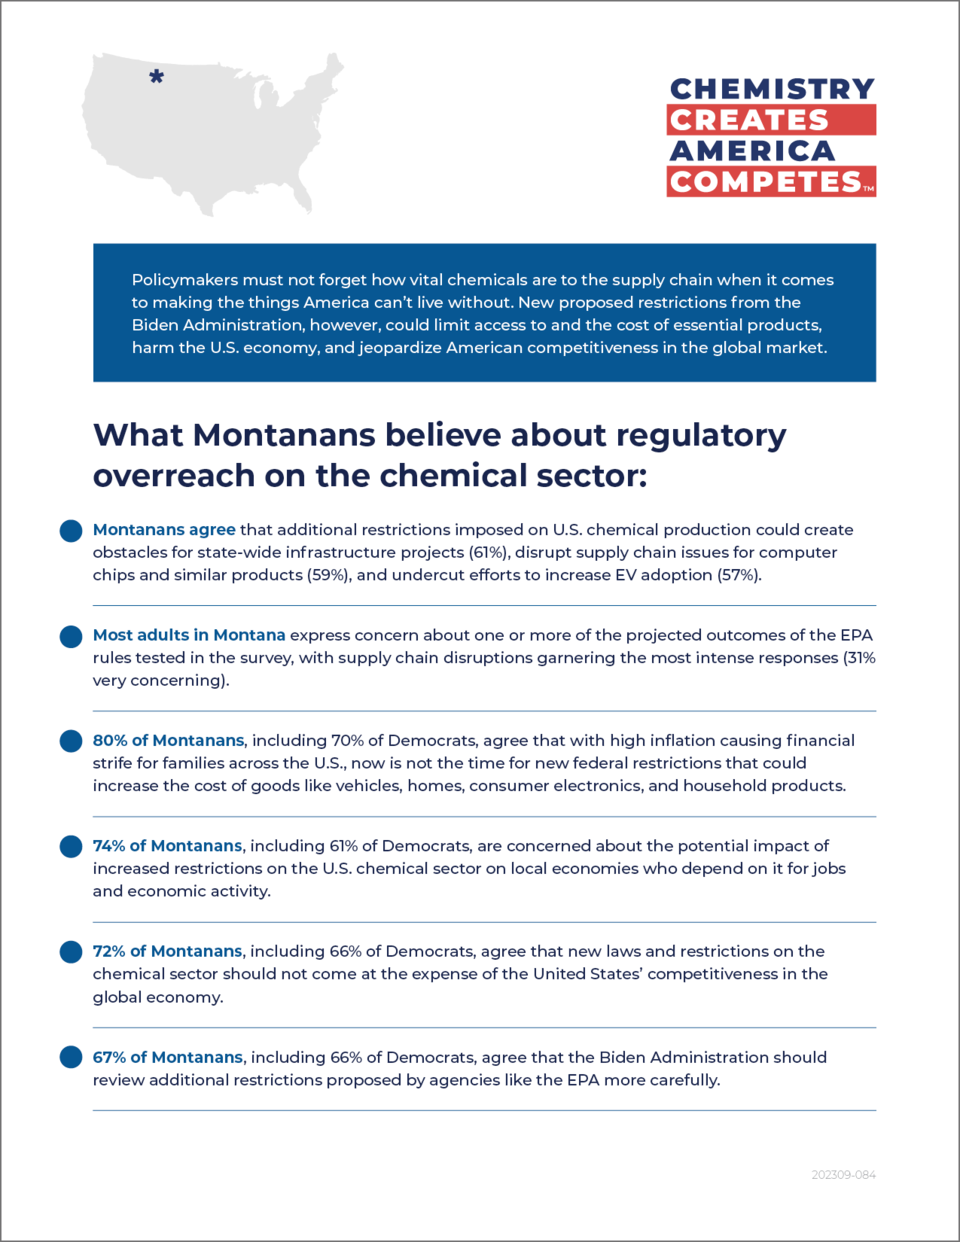 What Montanans Believe About Regulatory Overreach on Chemical Sector - Fact Sheet